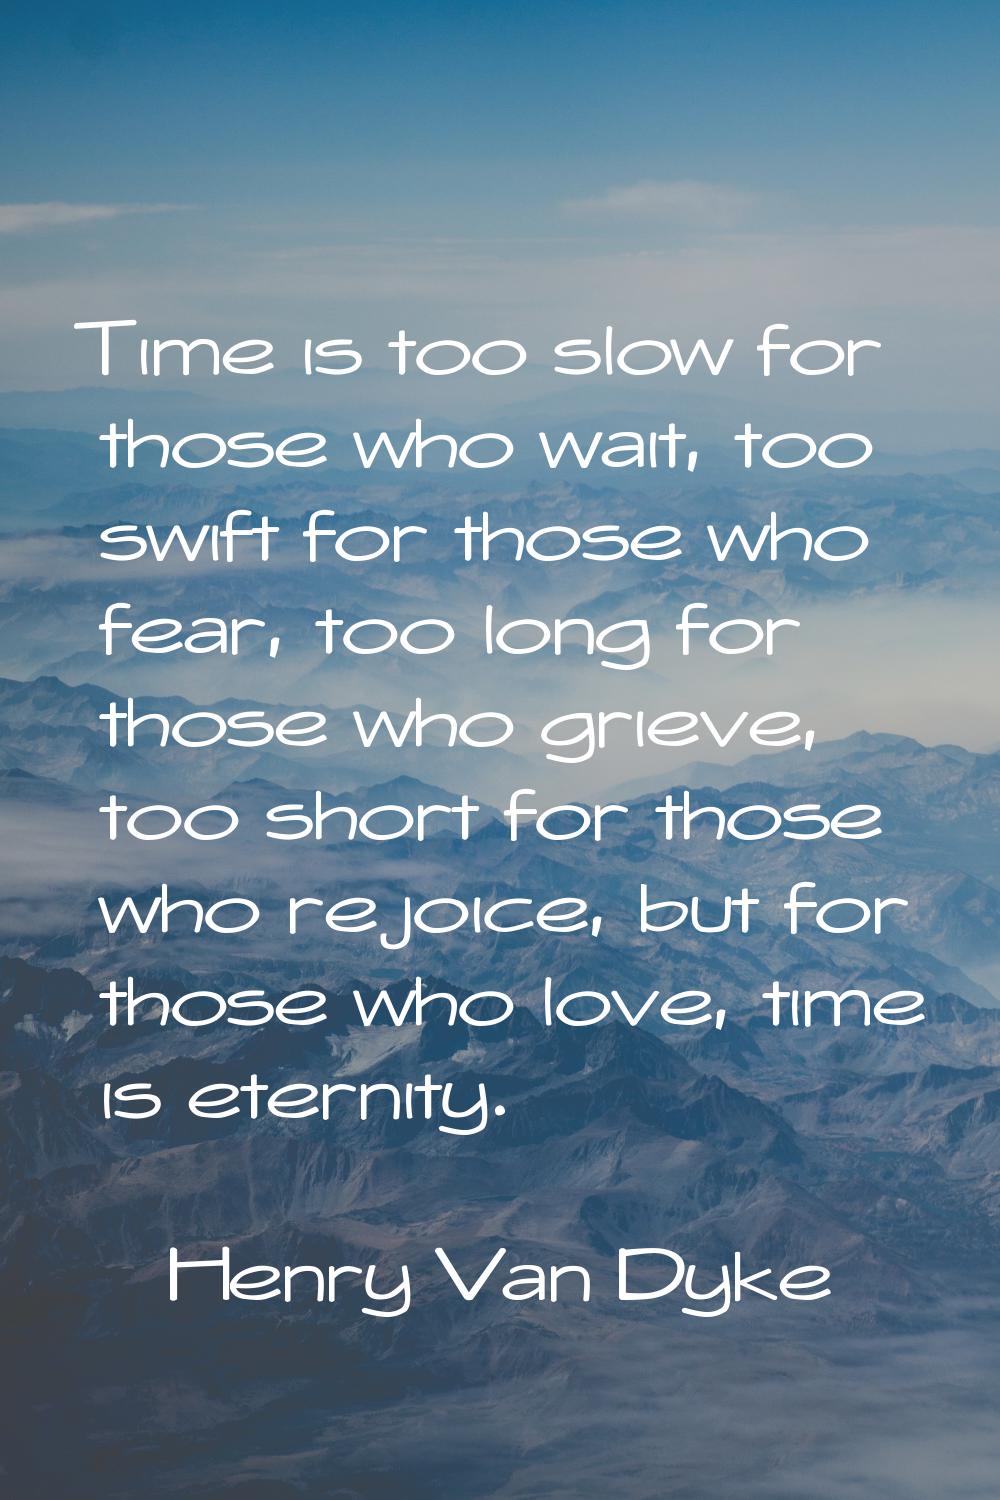 Time is too slow for those who wait, too swift for those who fear, too long for those who grieve, t